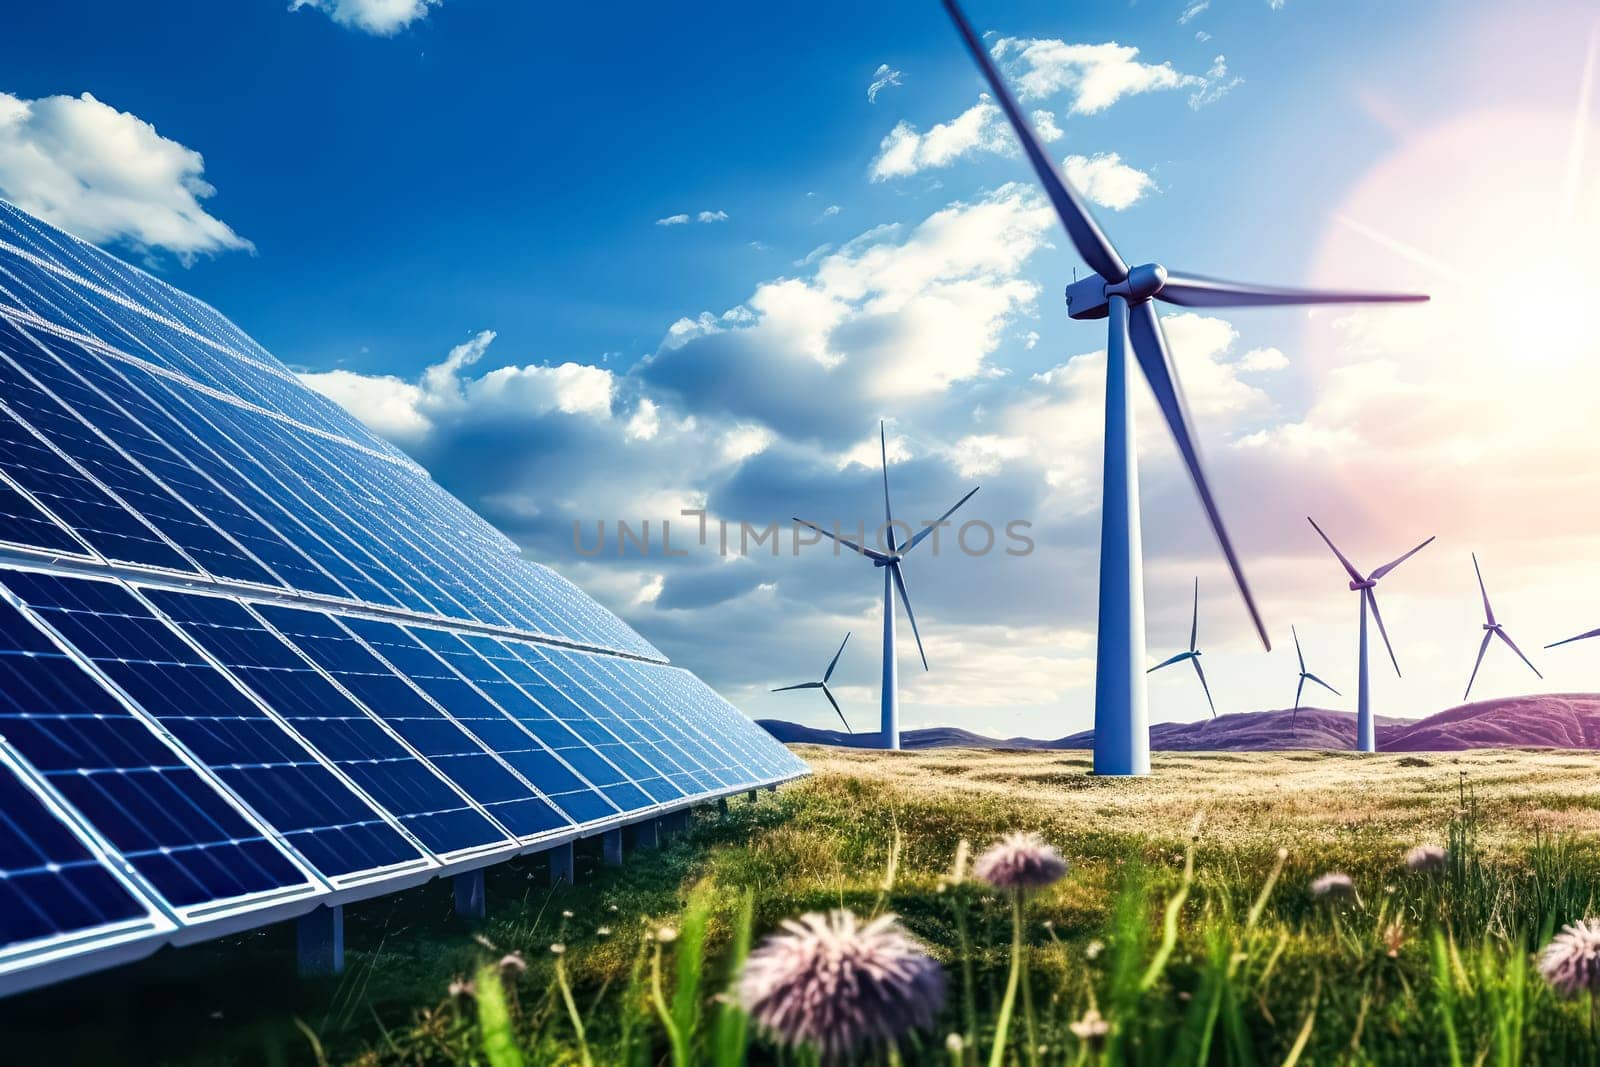 Solar panels and wind turbine illustrating green planet and renewable energy. Standard visual concept capturing the harmony of sustainable power sources.